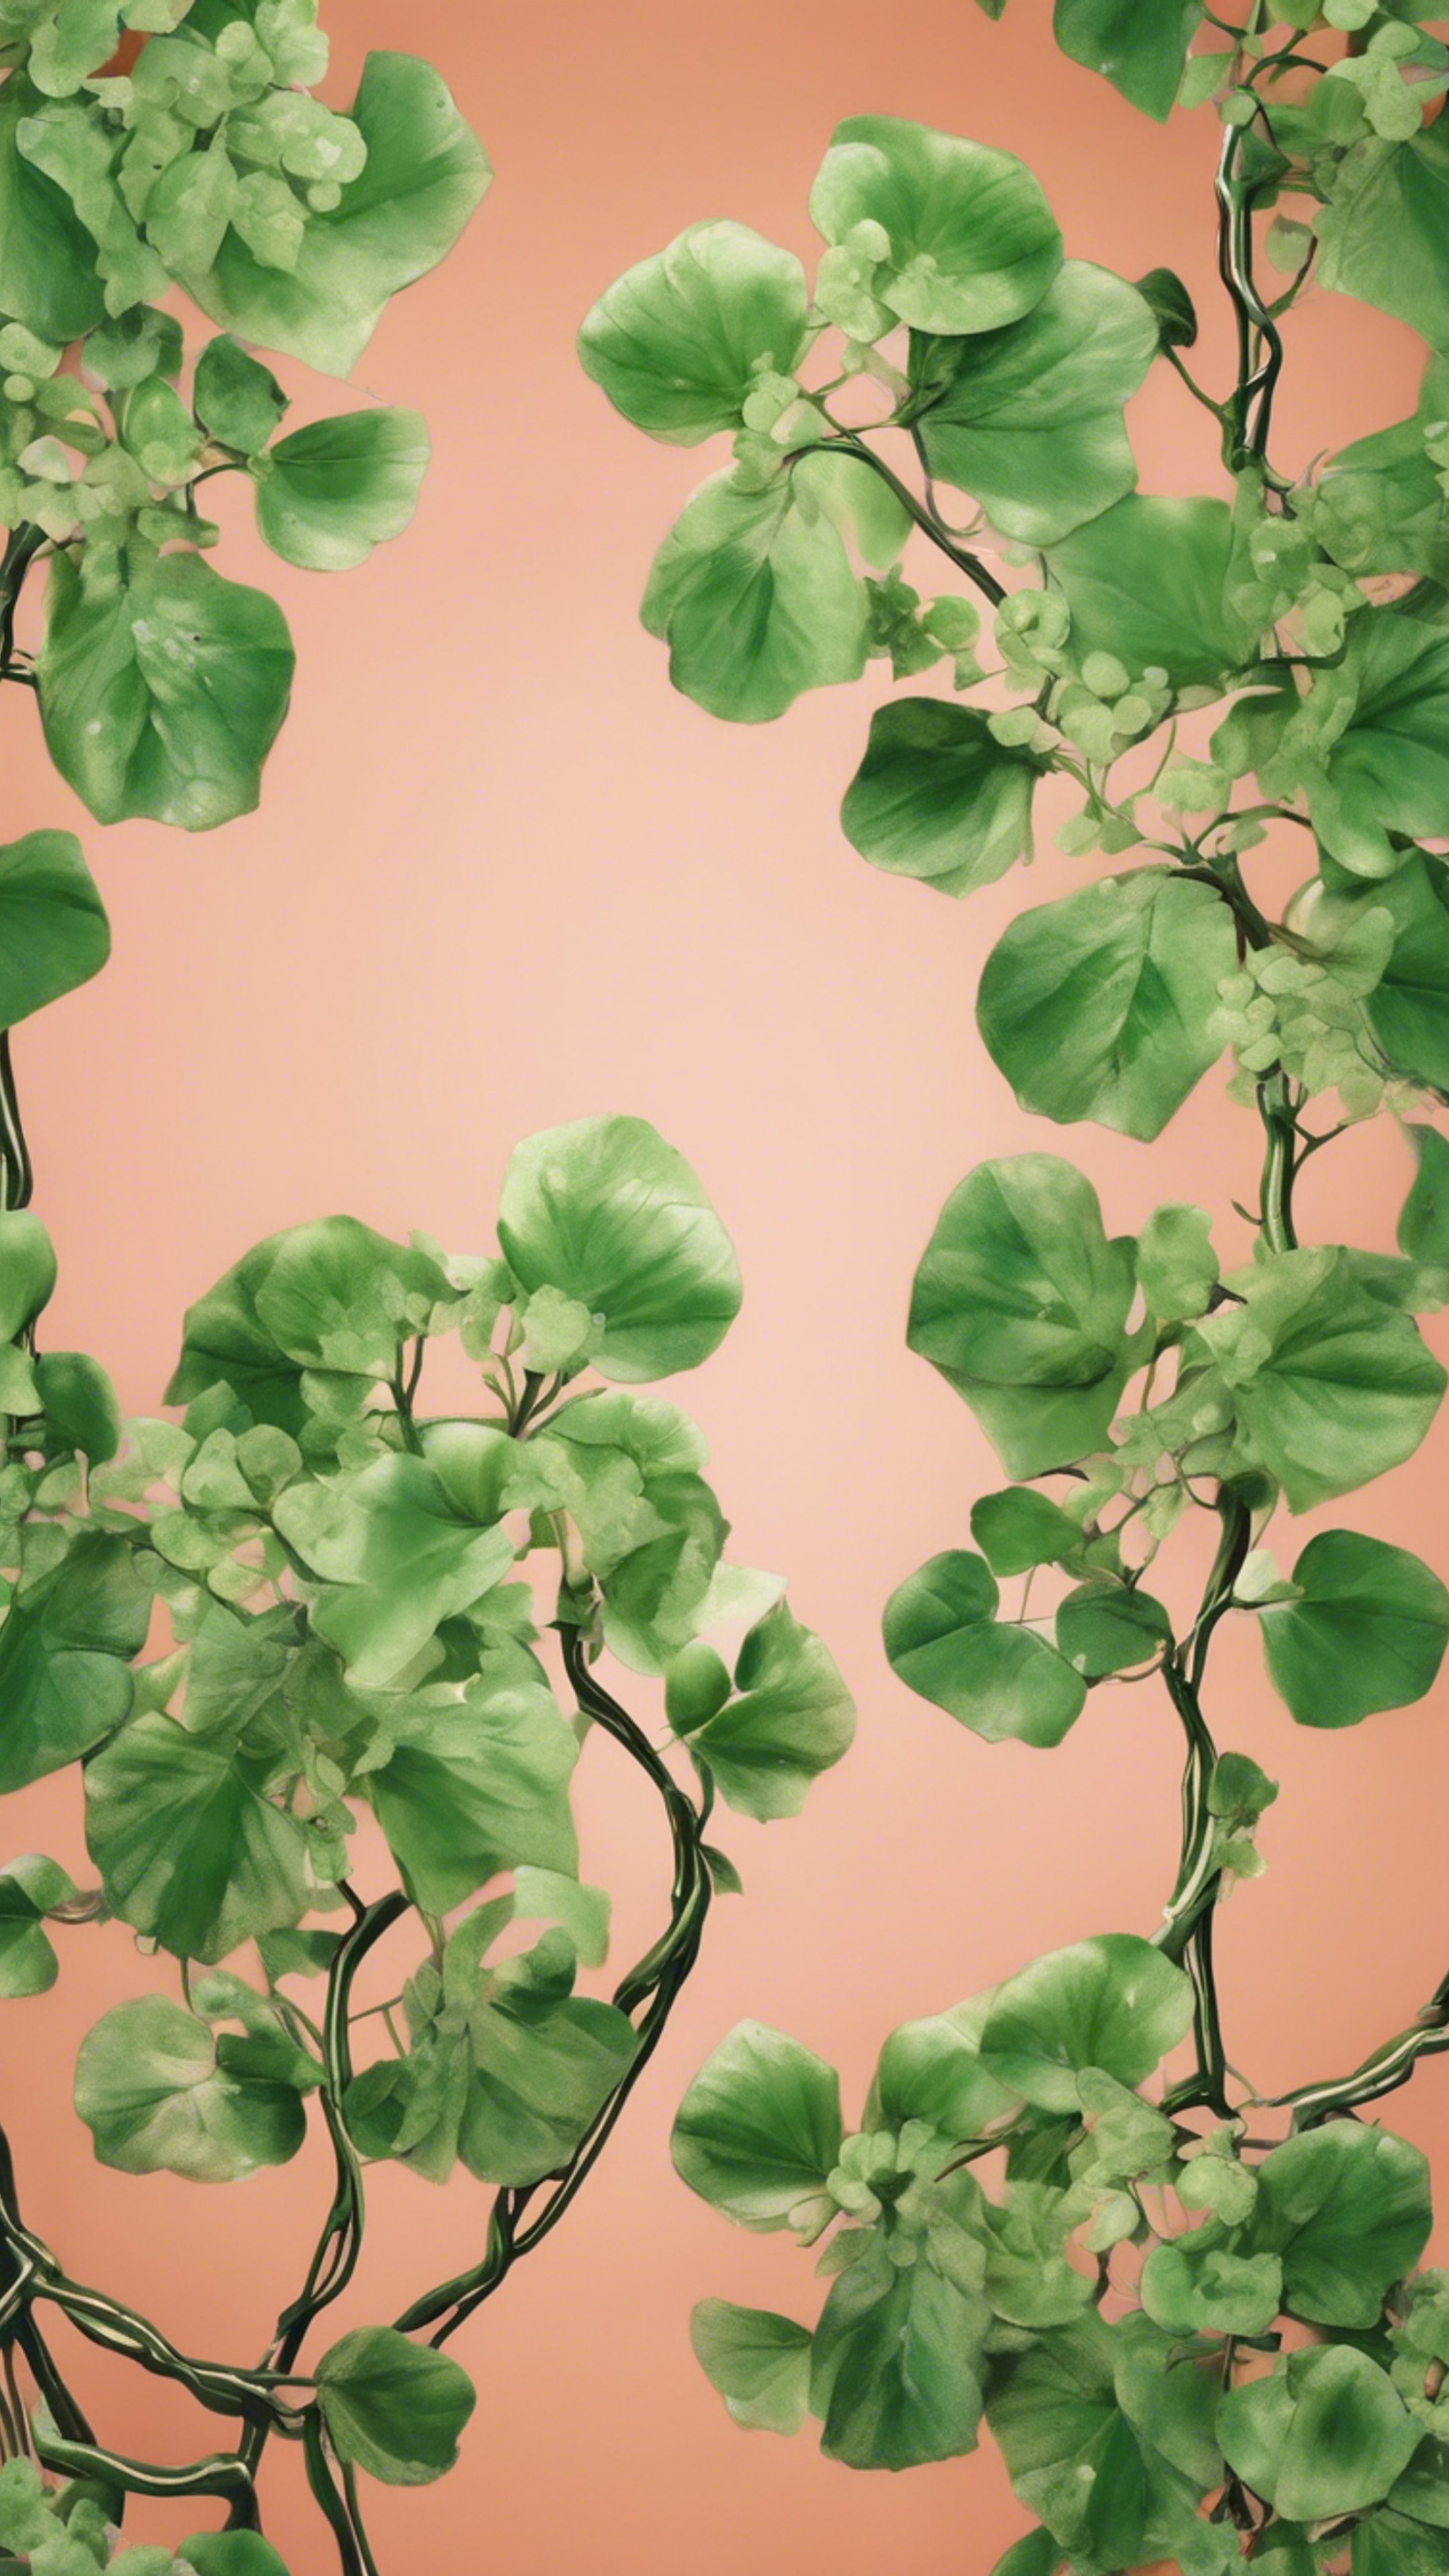 Illustration of spring green flowering vines intertwining on a coral backdrop. Wallpaper[a9b023a2db114c8dacbd]